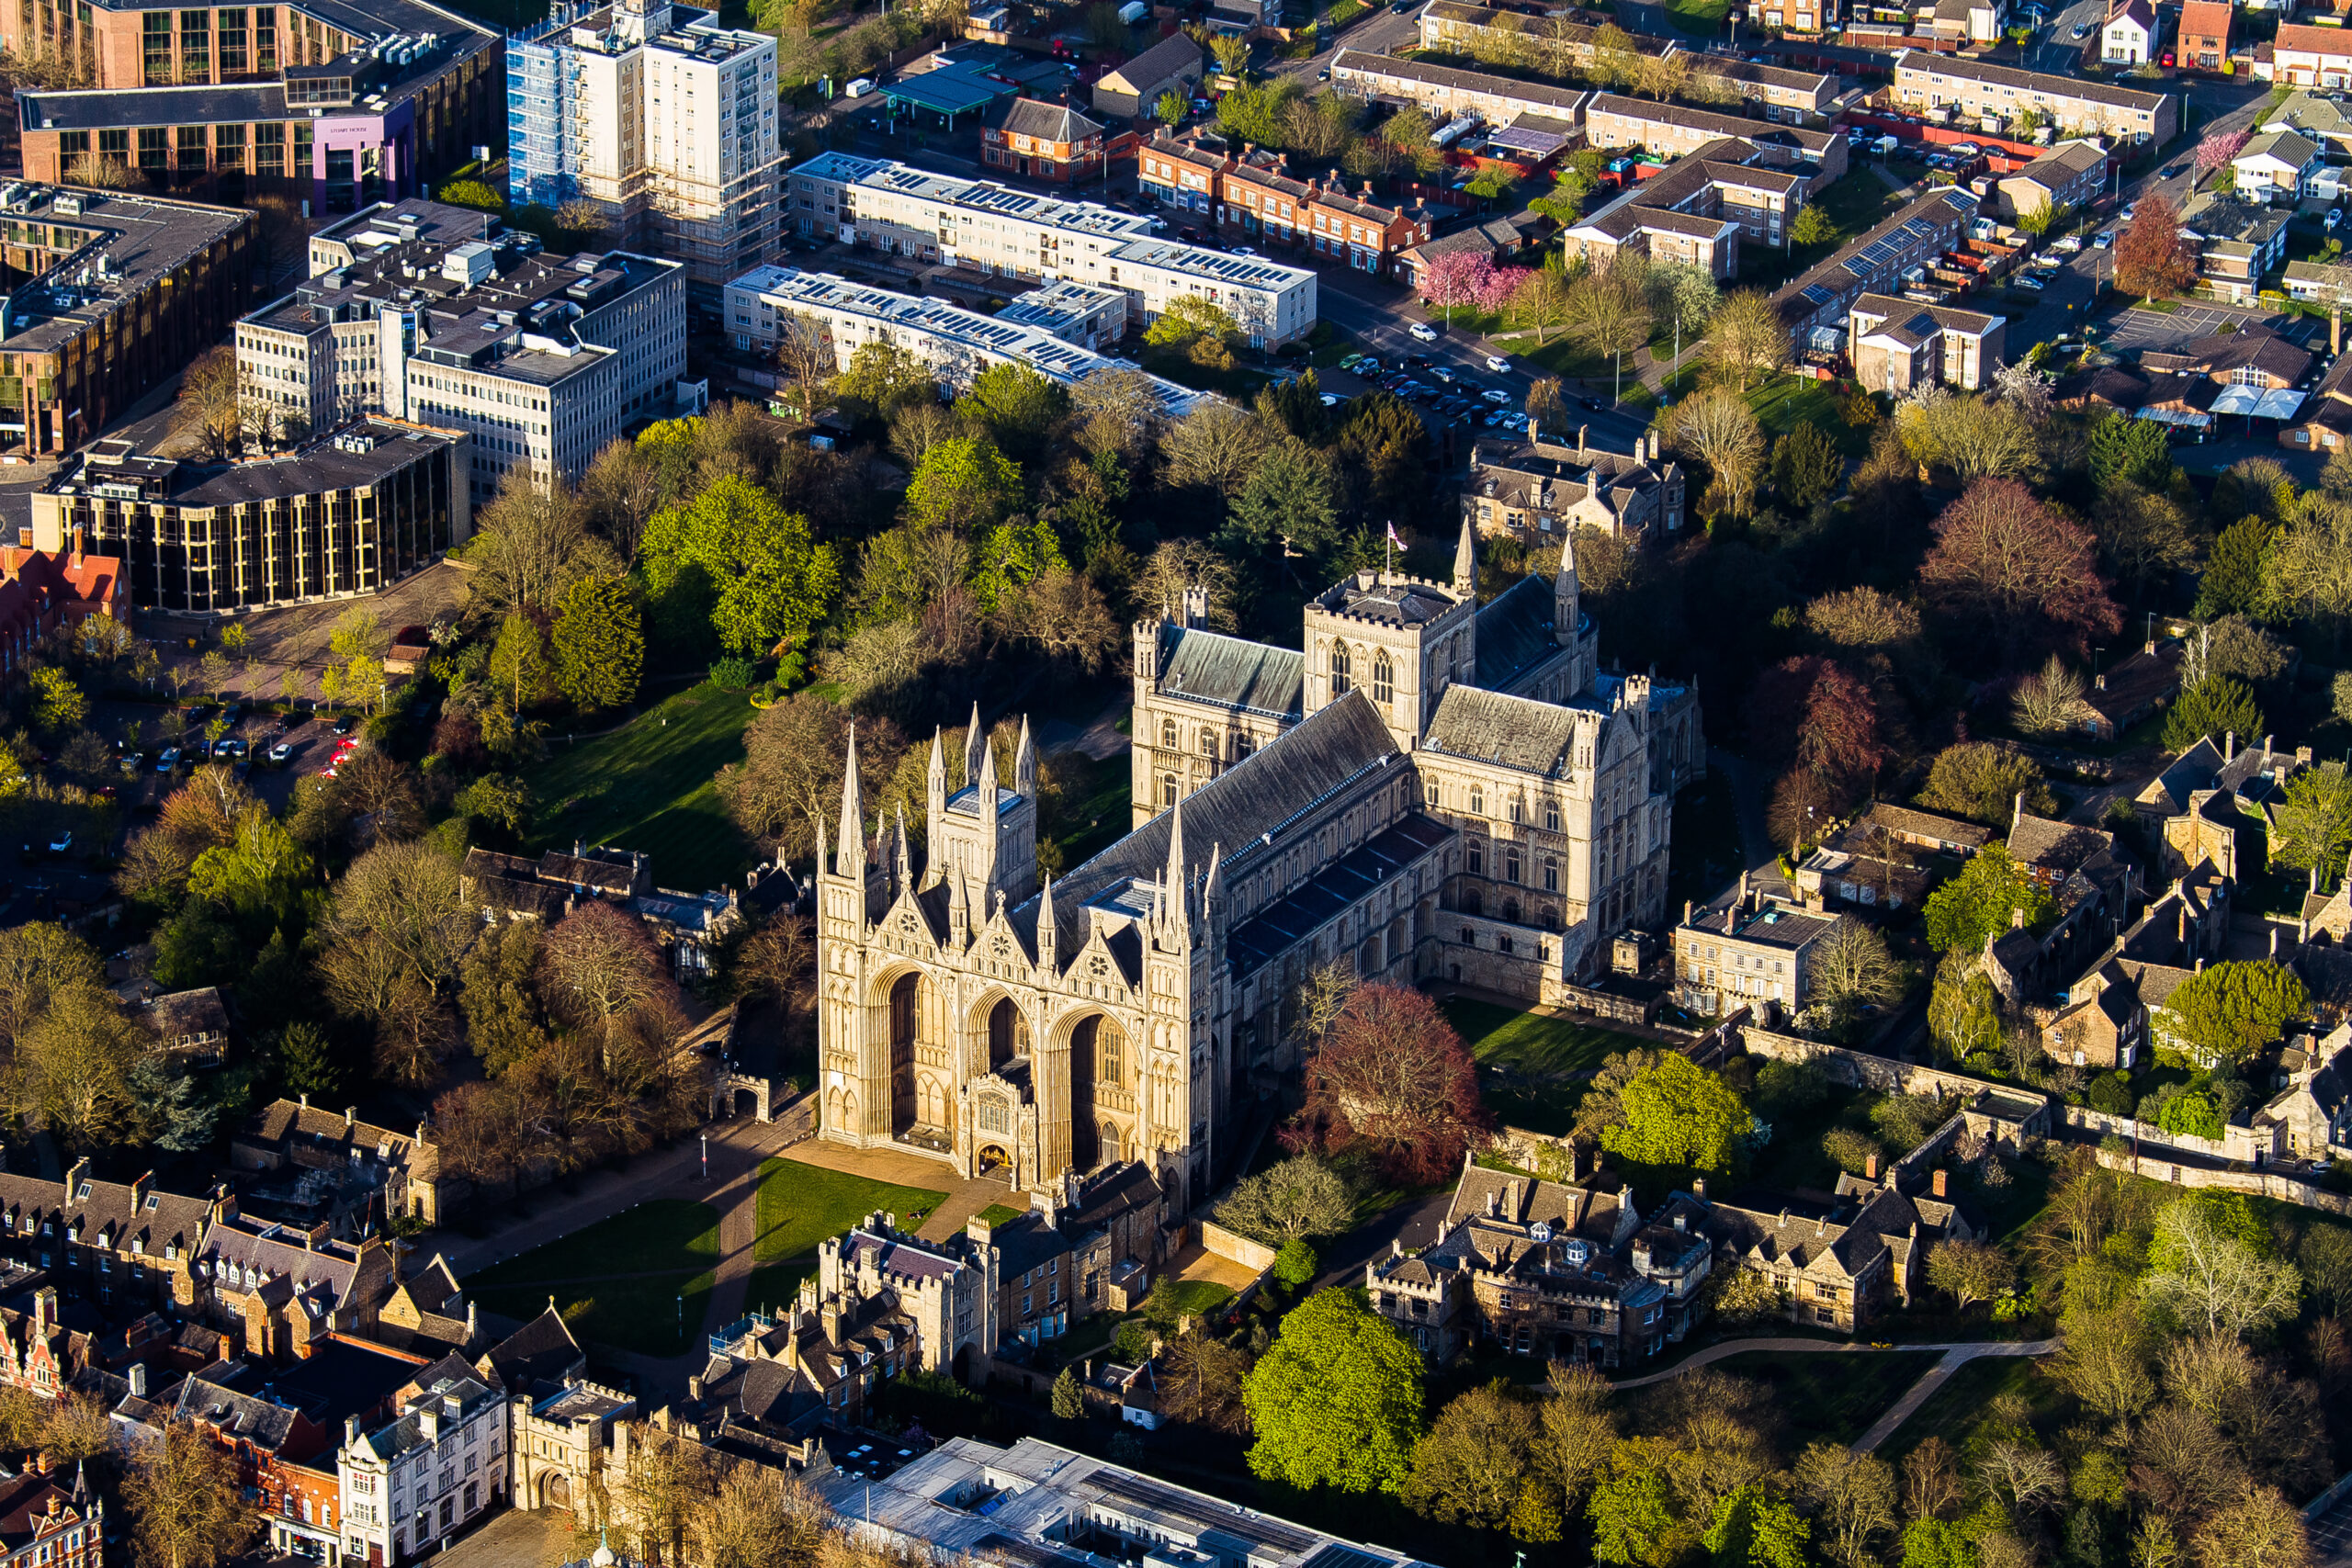 An aerial shot of the Peterborough Cathedral in Peterborough, England during daylight